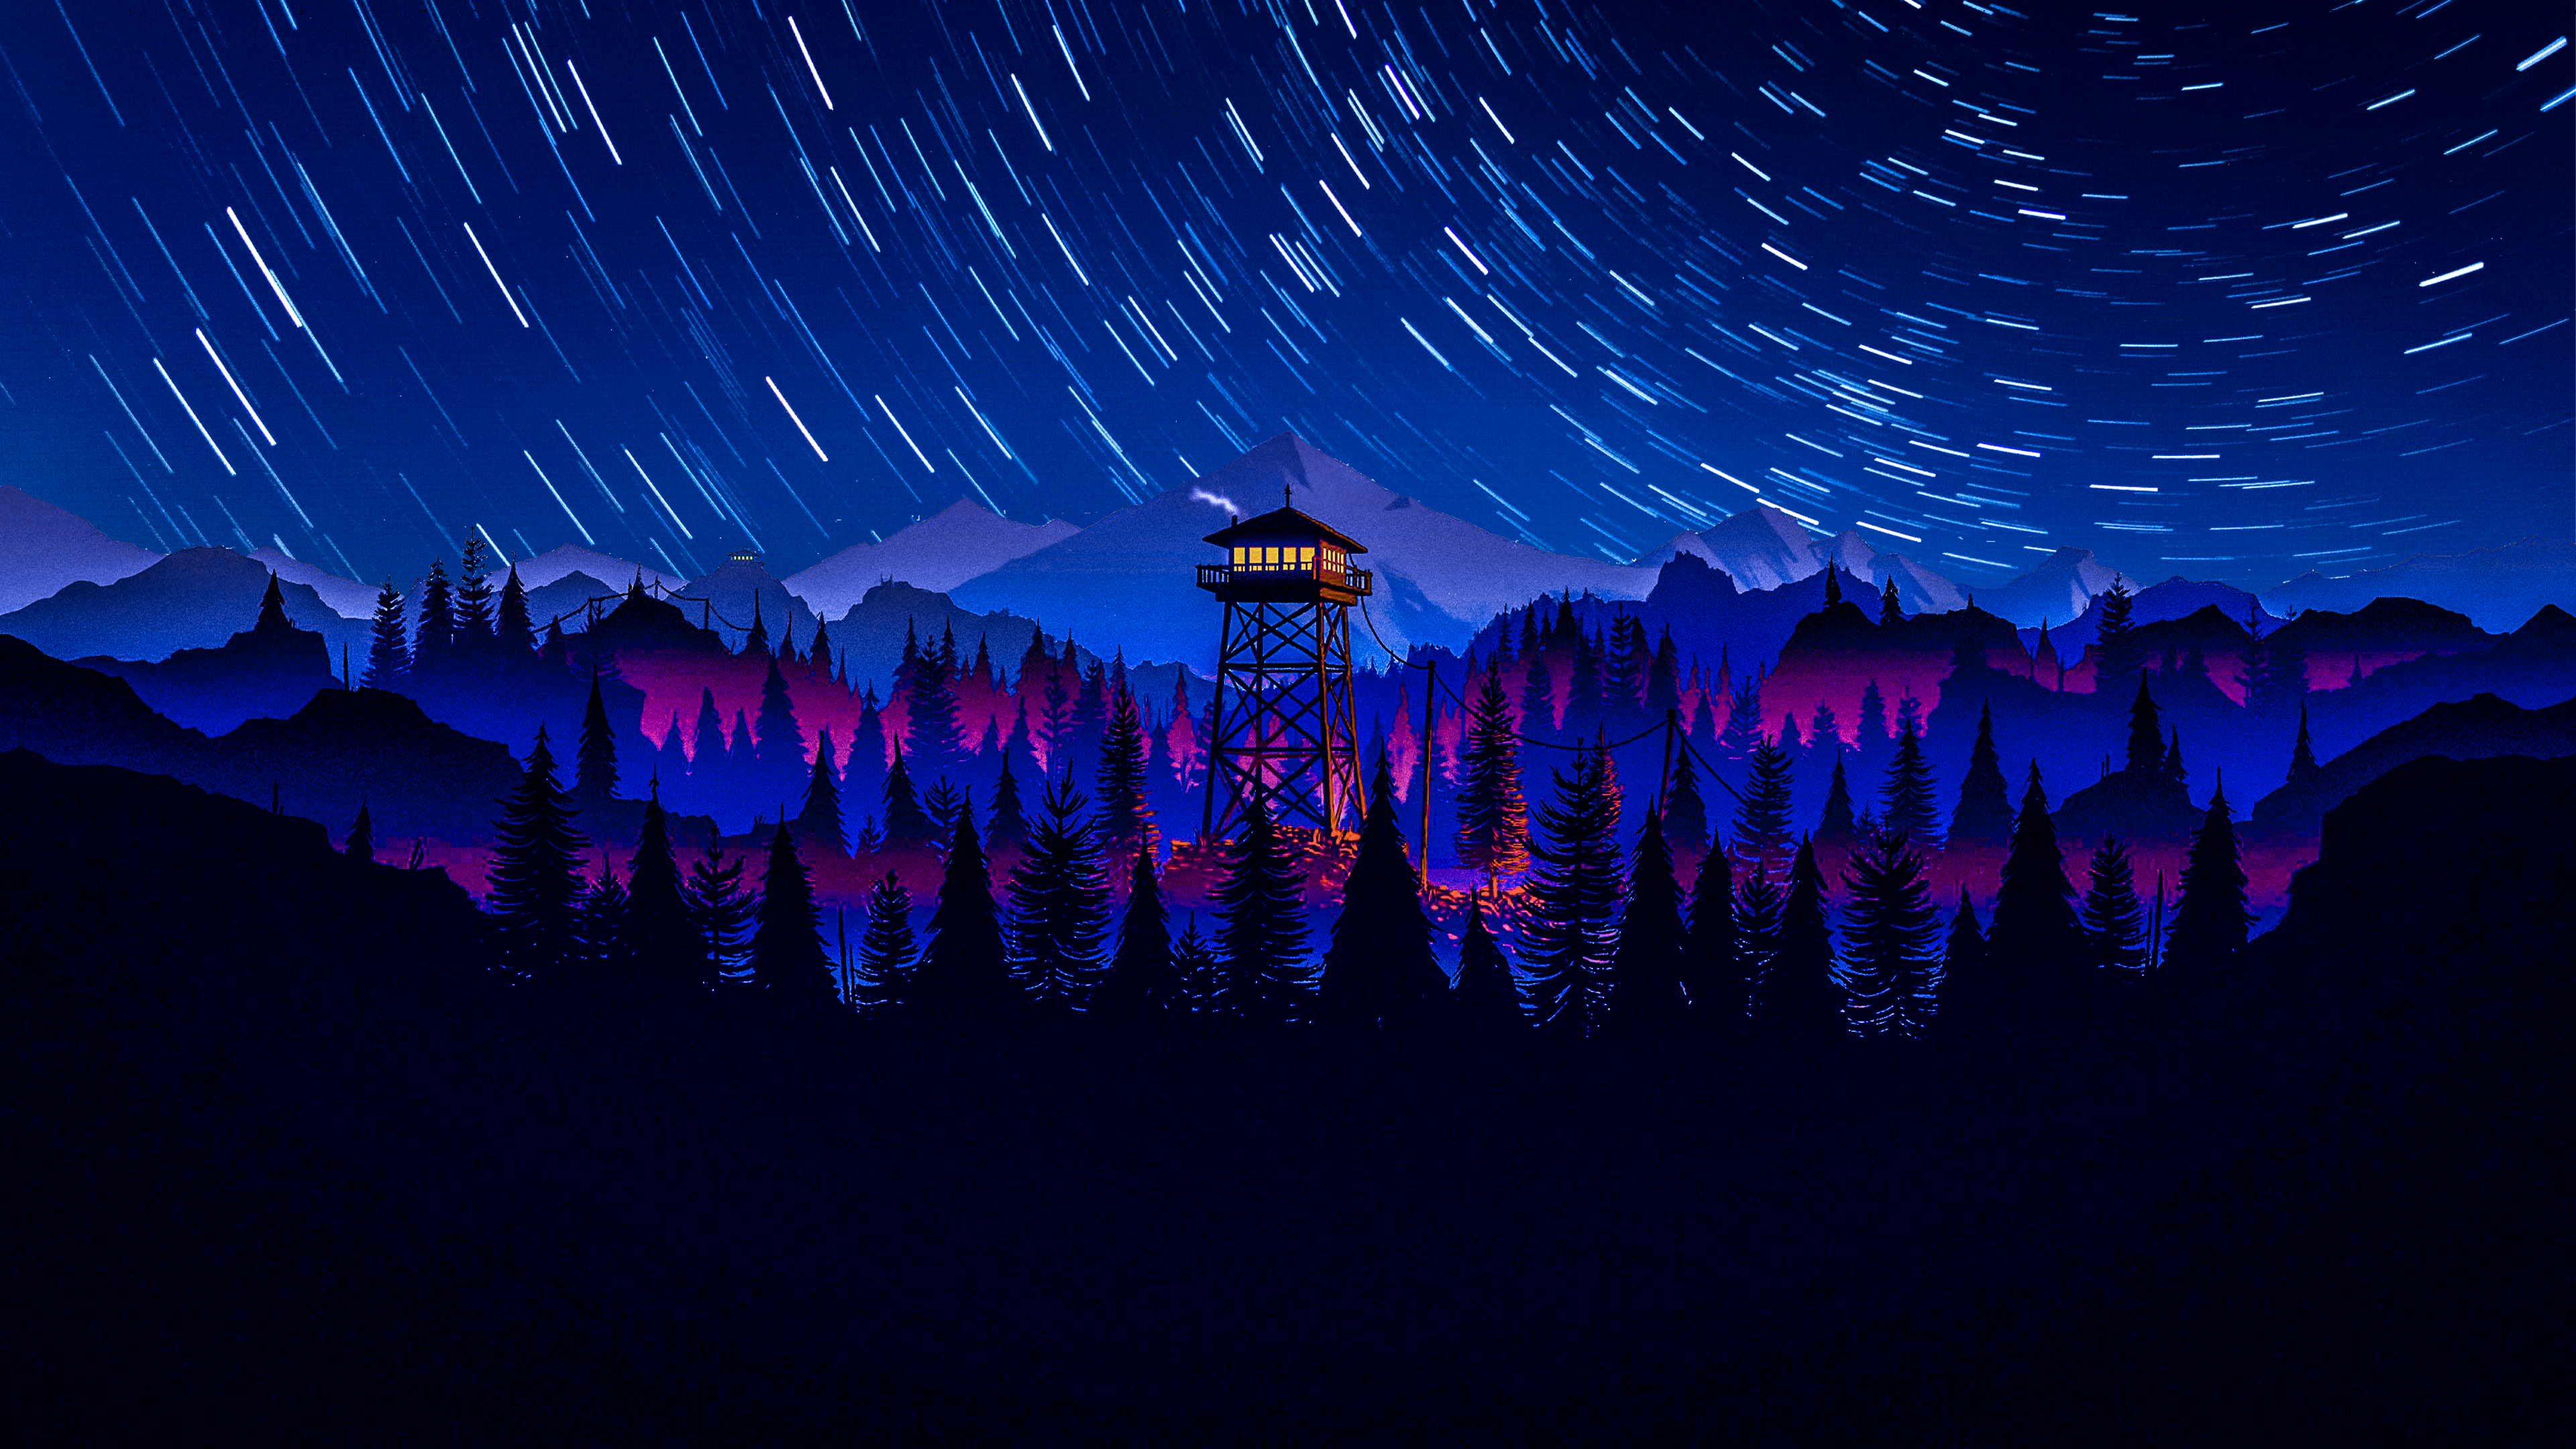 Firewatch Wallpaper (Different Times of Day) : r/iWallpaper